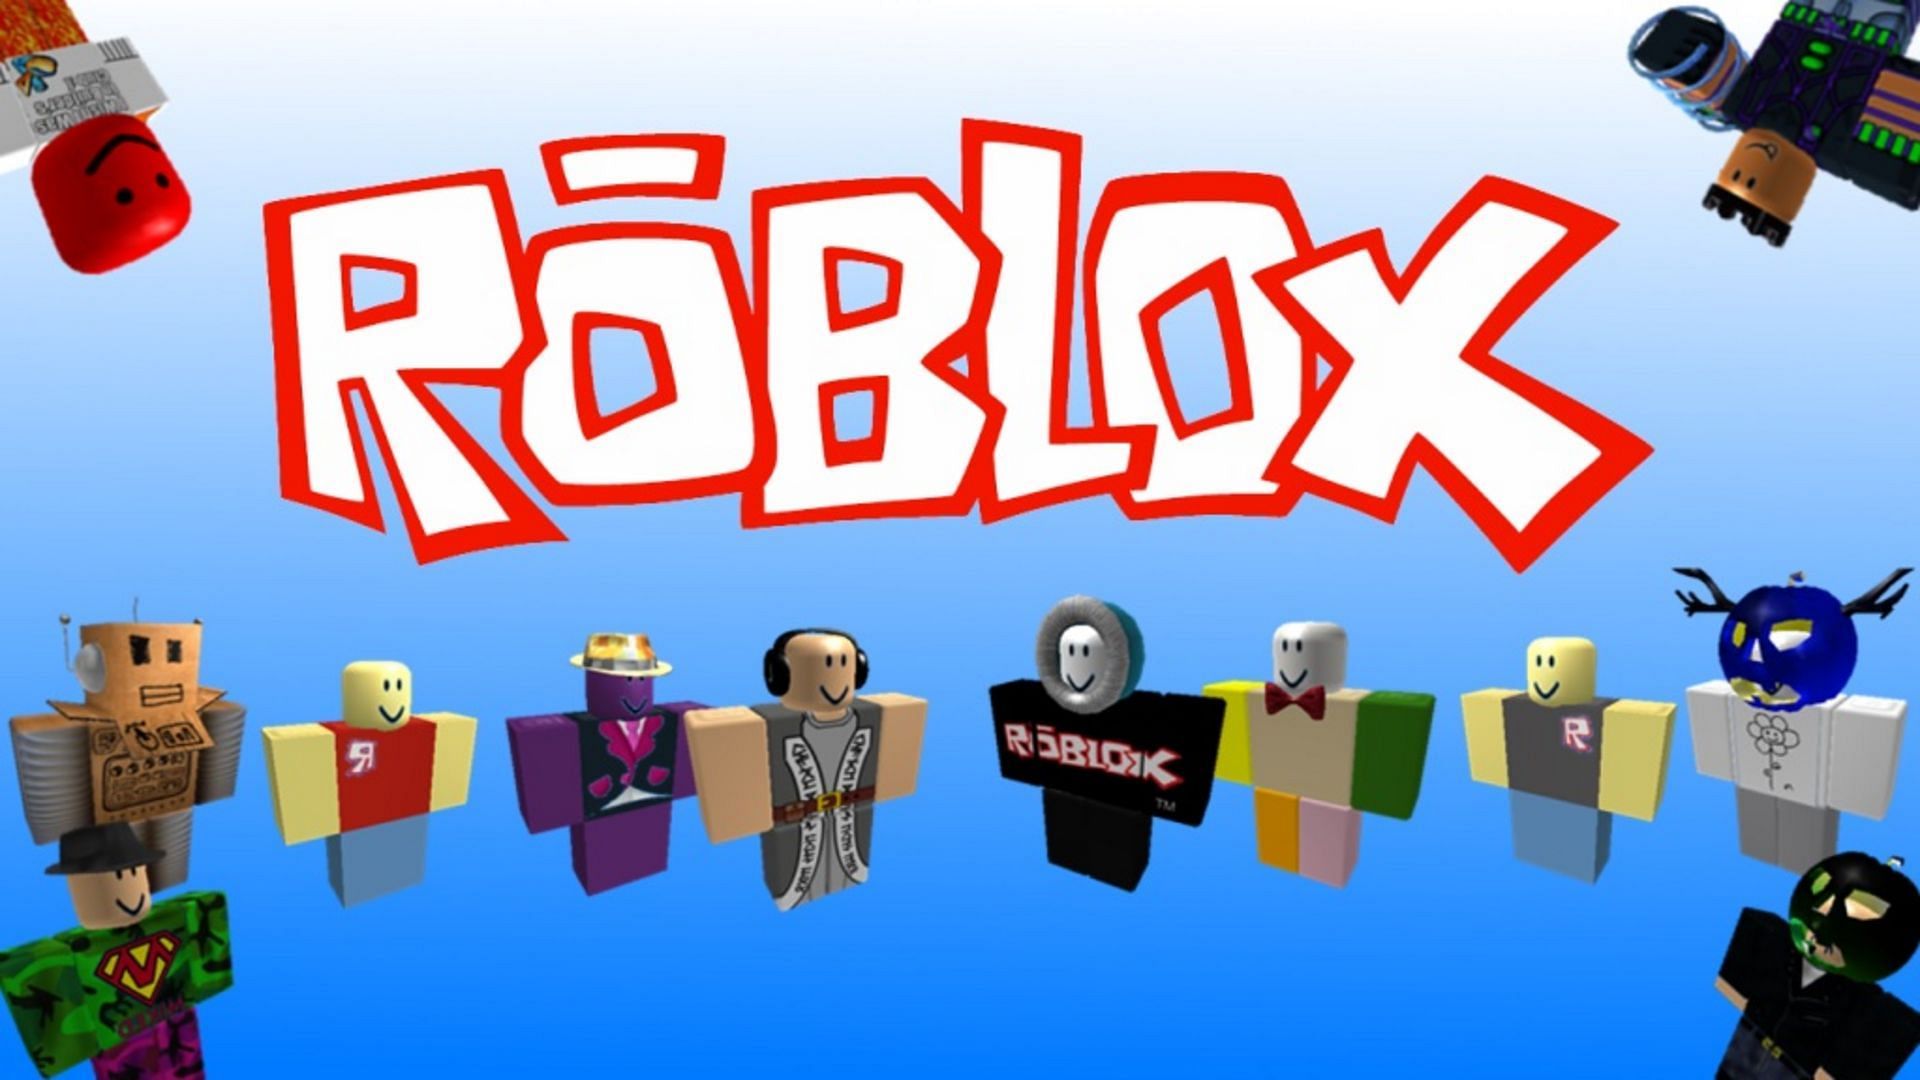 Erik Cassel - Co-founder of Roblox - Has Died